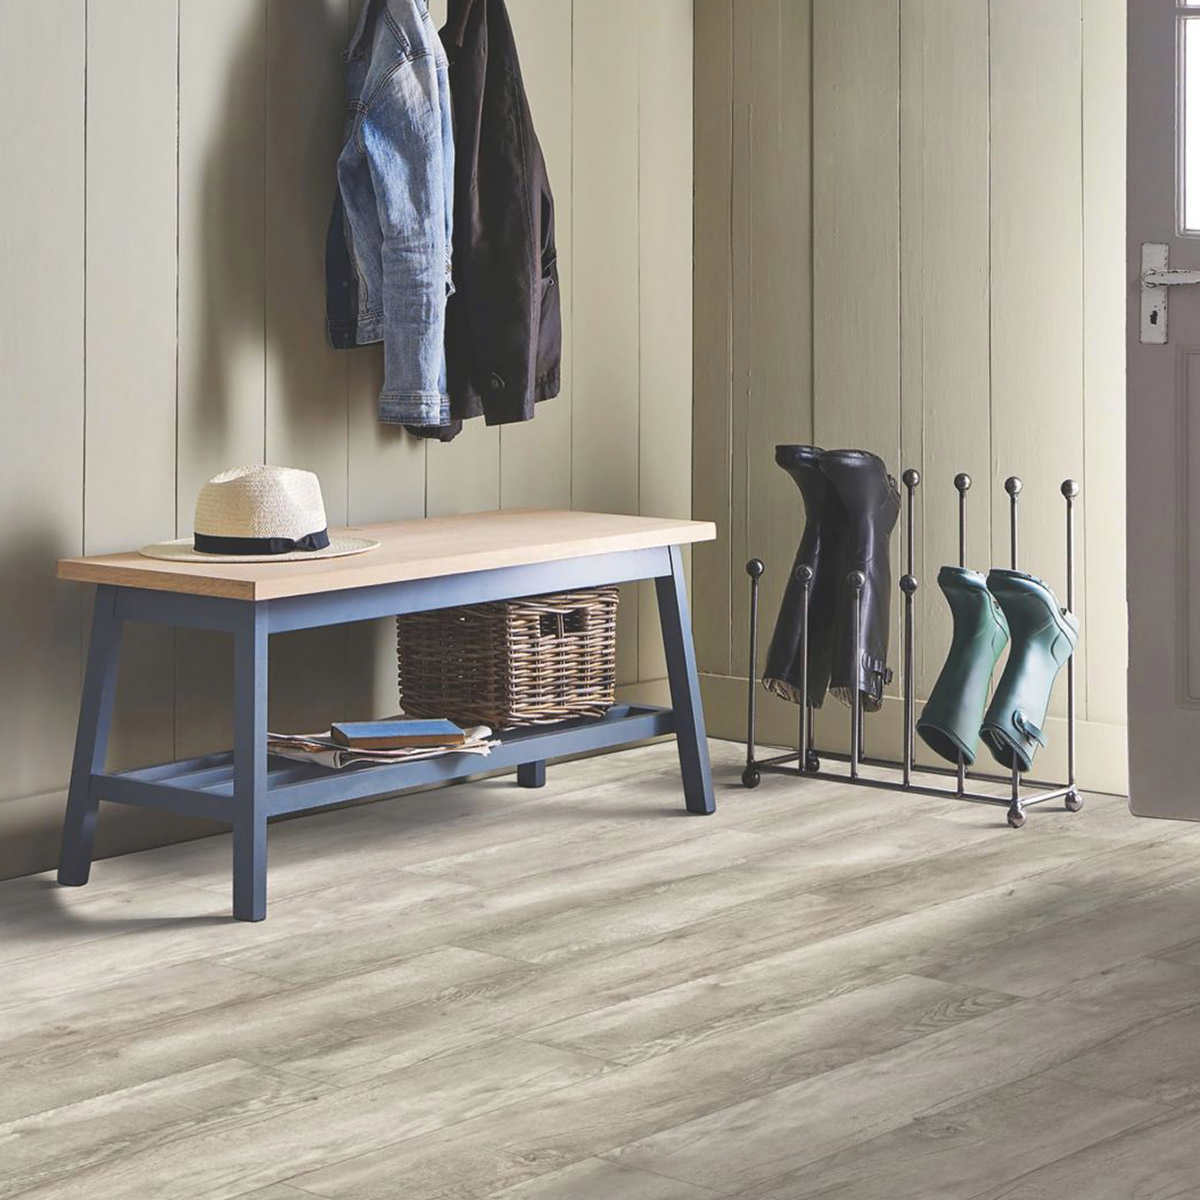 Mohawk Home Osprey Oak Waterproof Rigid 5mm Thick Luxury Vinyl Plank Flooring 1mm Attached Pad Included Costco